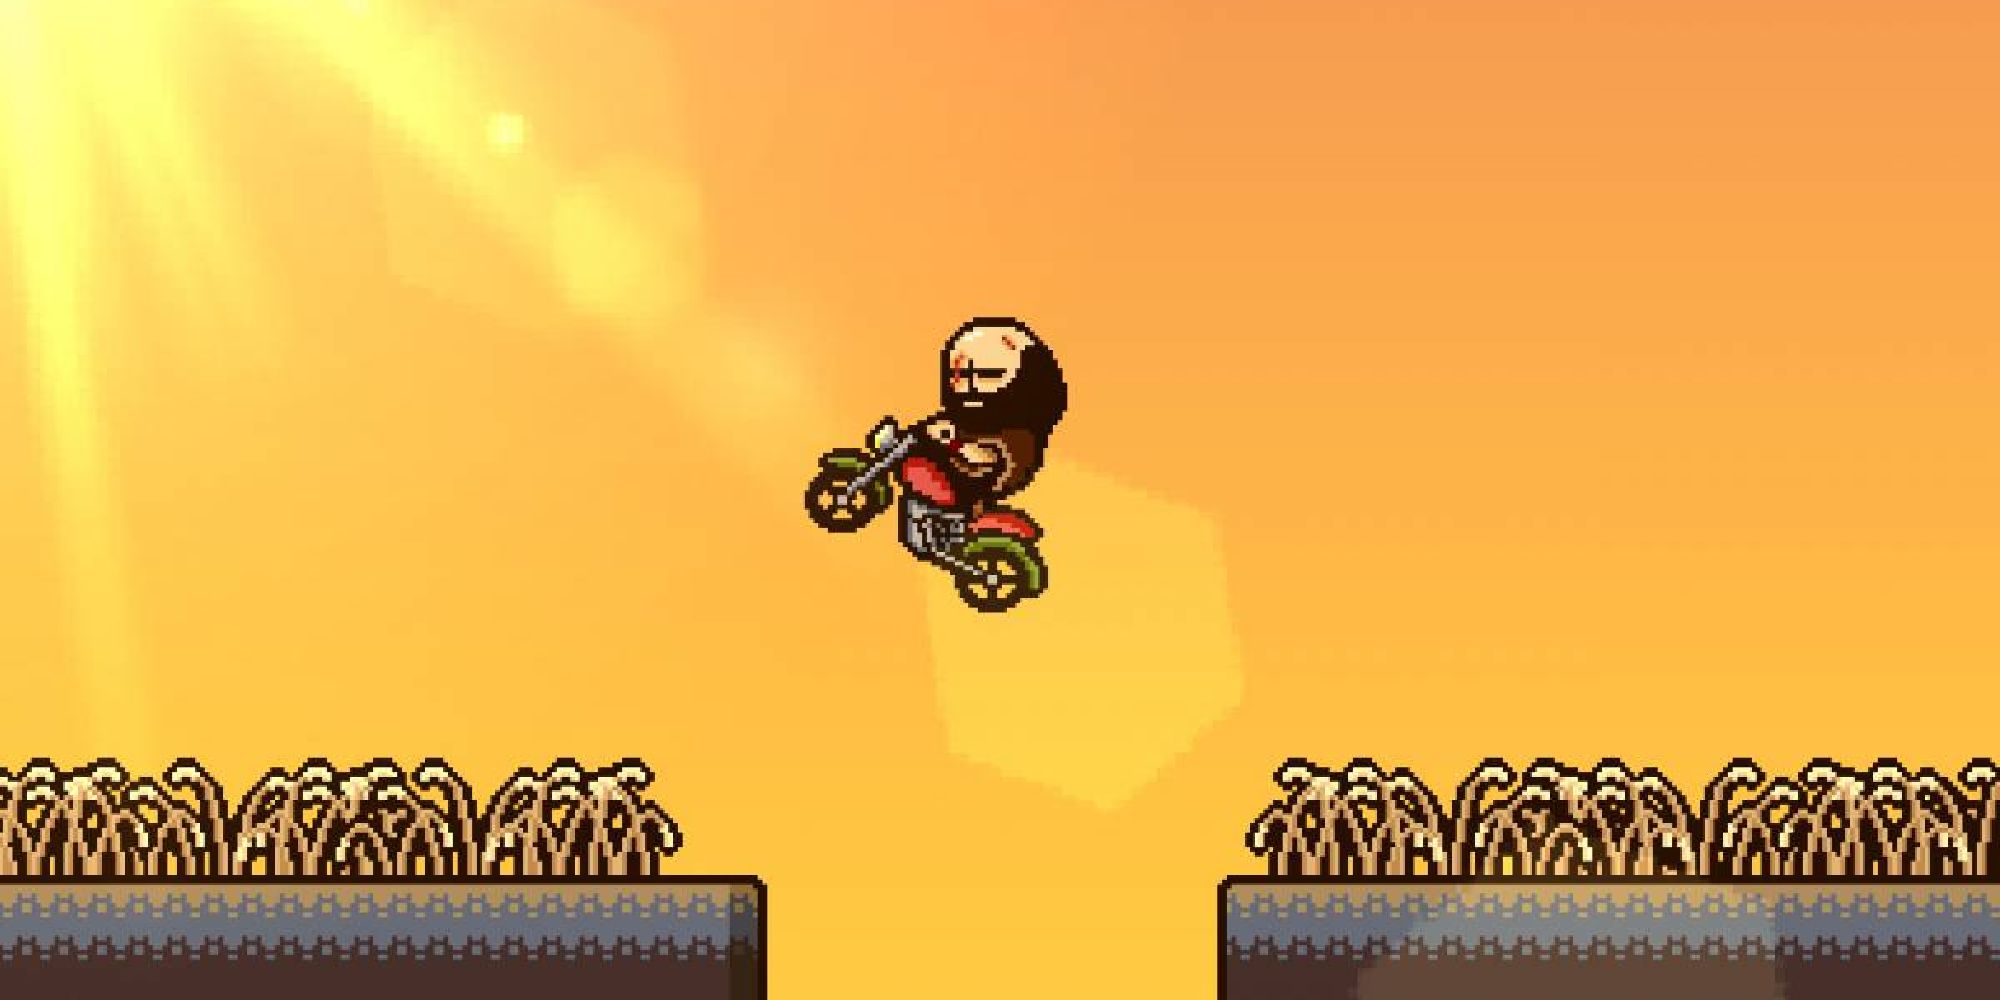 Brad Armstrong riding through a wheatfield on a motorcycle in Lisa: The Painful